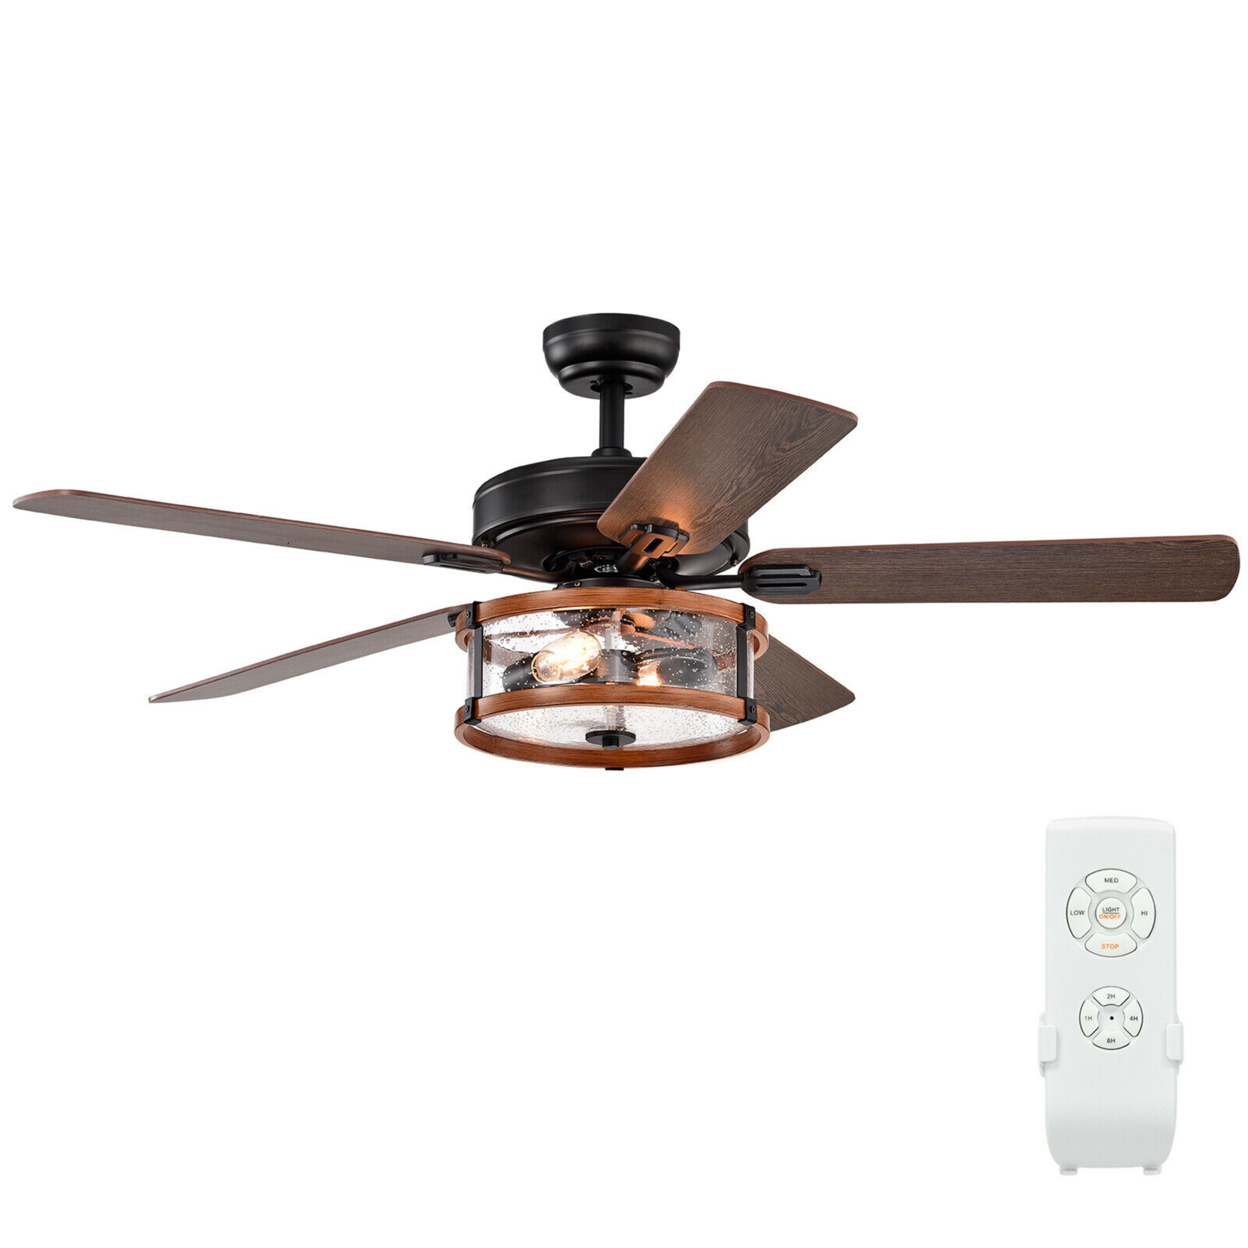 52'' Retro Ceiling Fan Lamp W/Glass Shade Reversible Blade Remote Control